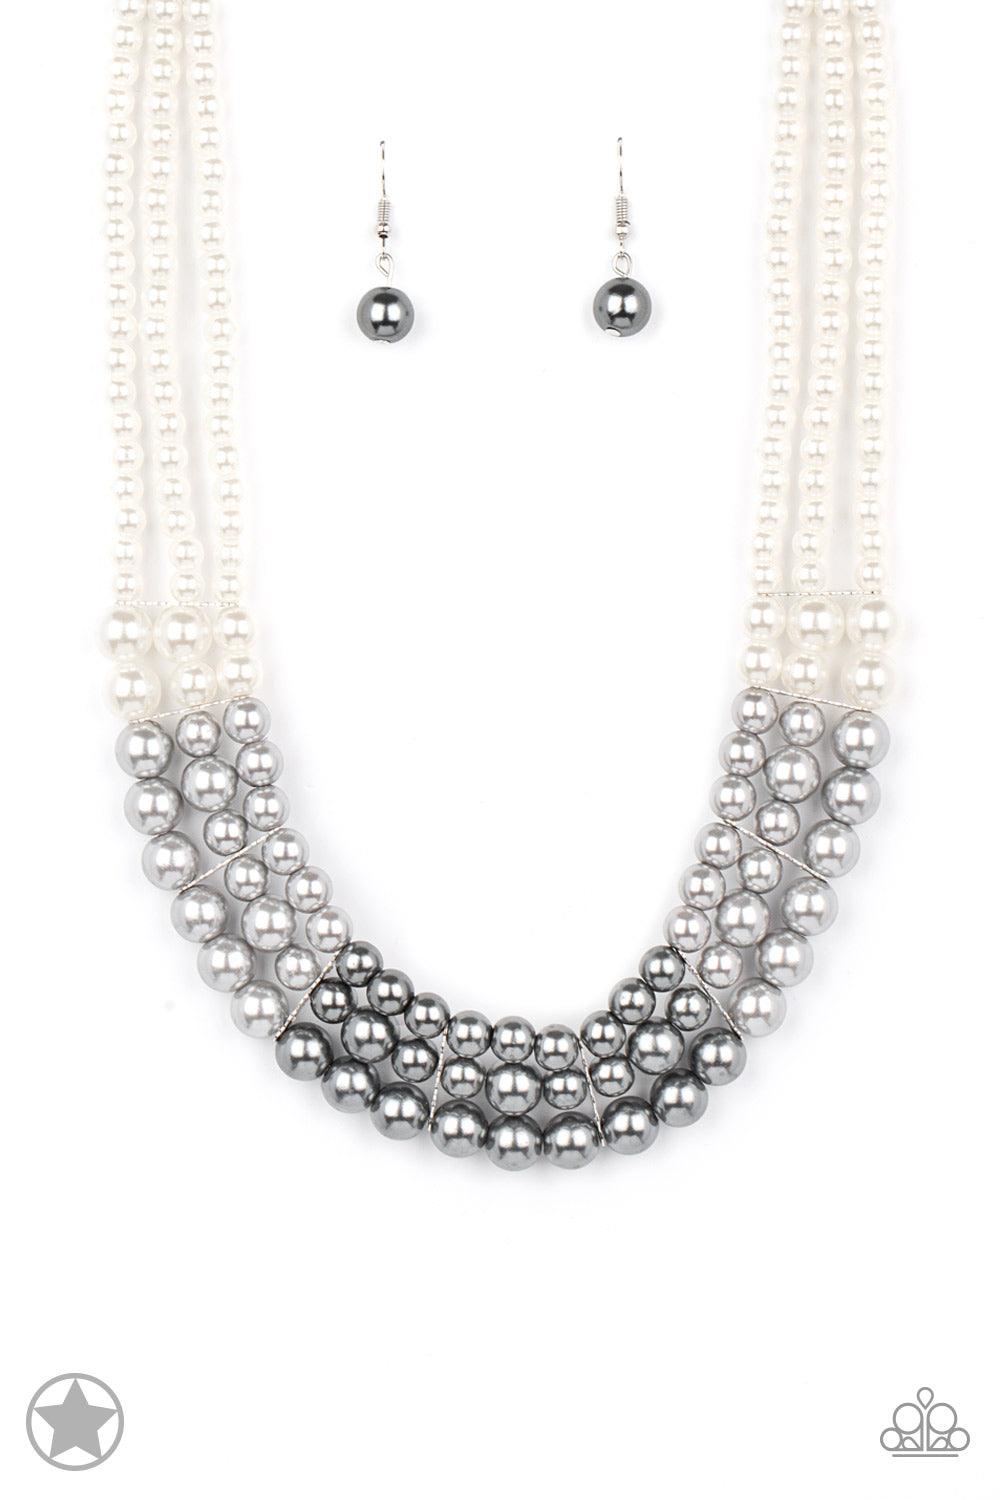 Paparazzi Accessories Lady In Waiting Strands of white, silver, and dark gray pearls elegantly drape below the collar, creating a beautiful ombre effect. Sectioned by silver accents, the luminescent pearls radiantly fall into a glamorous cascade. Features